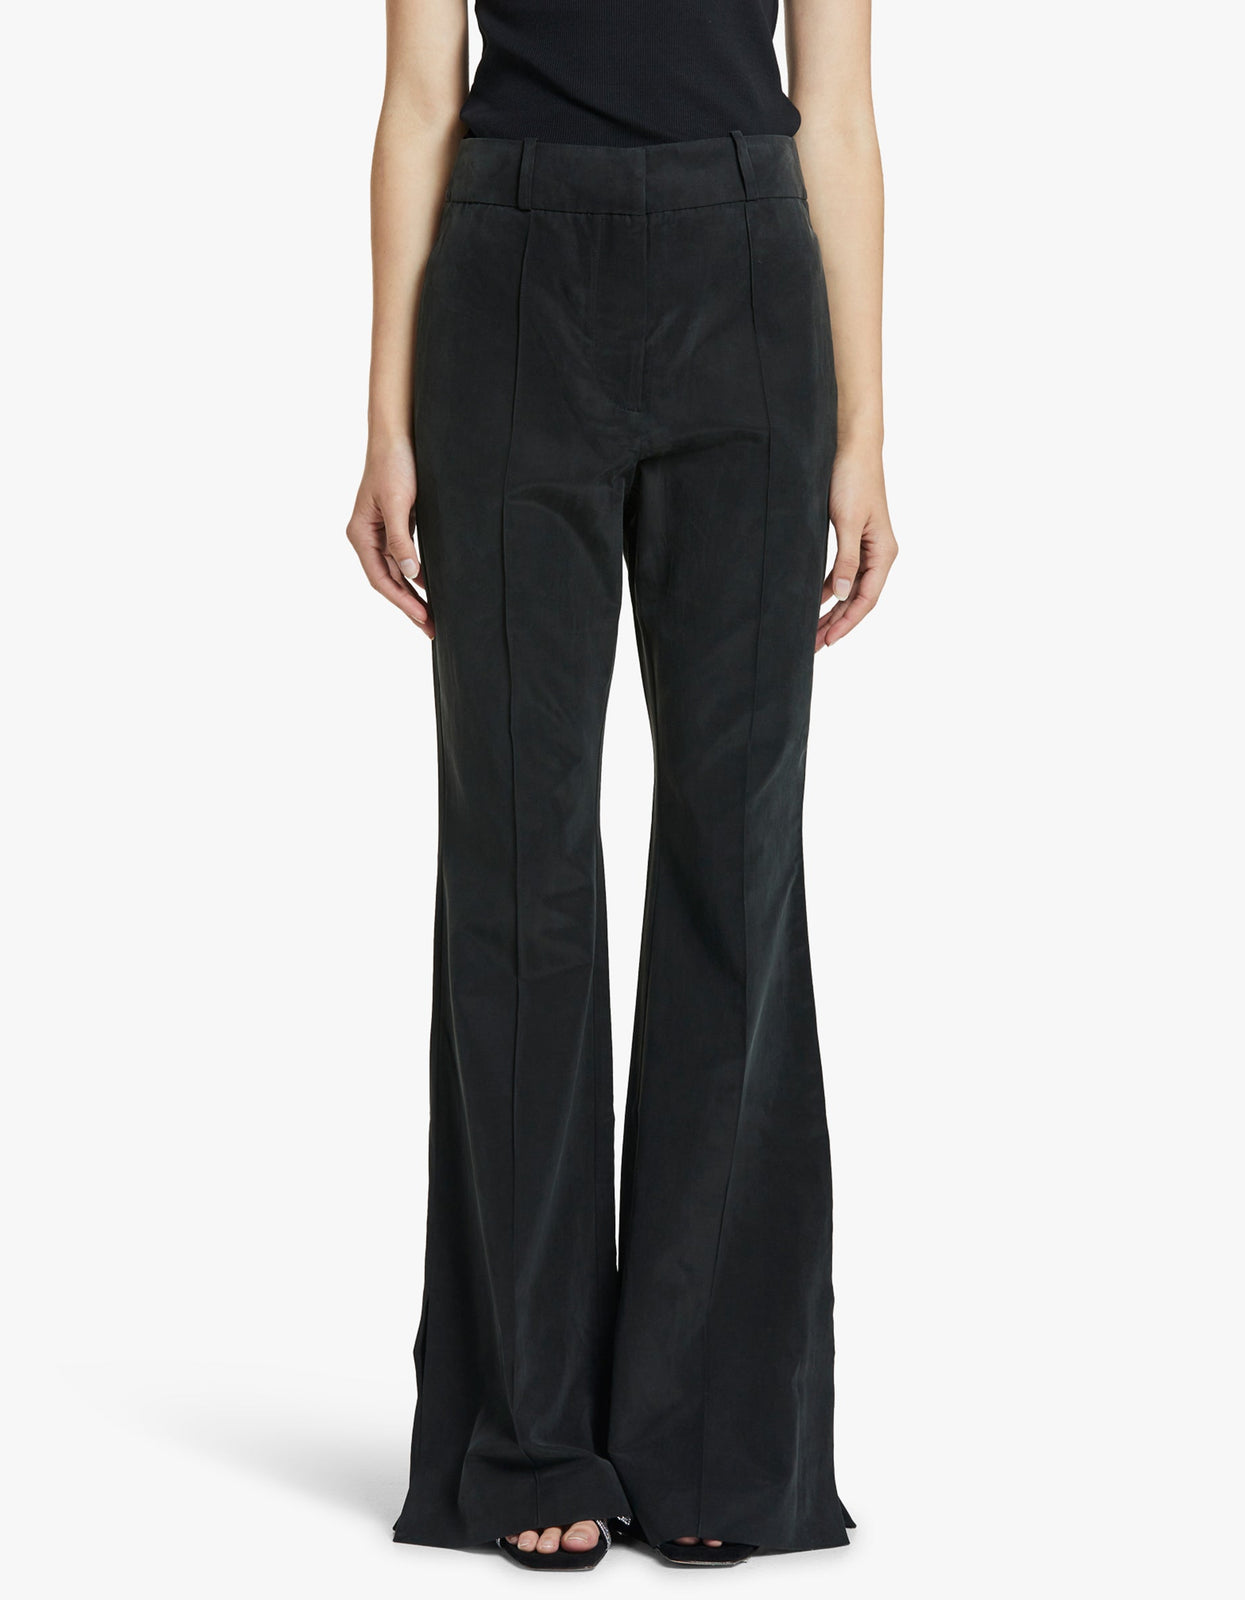 Superette  Flared Trousers - Black